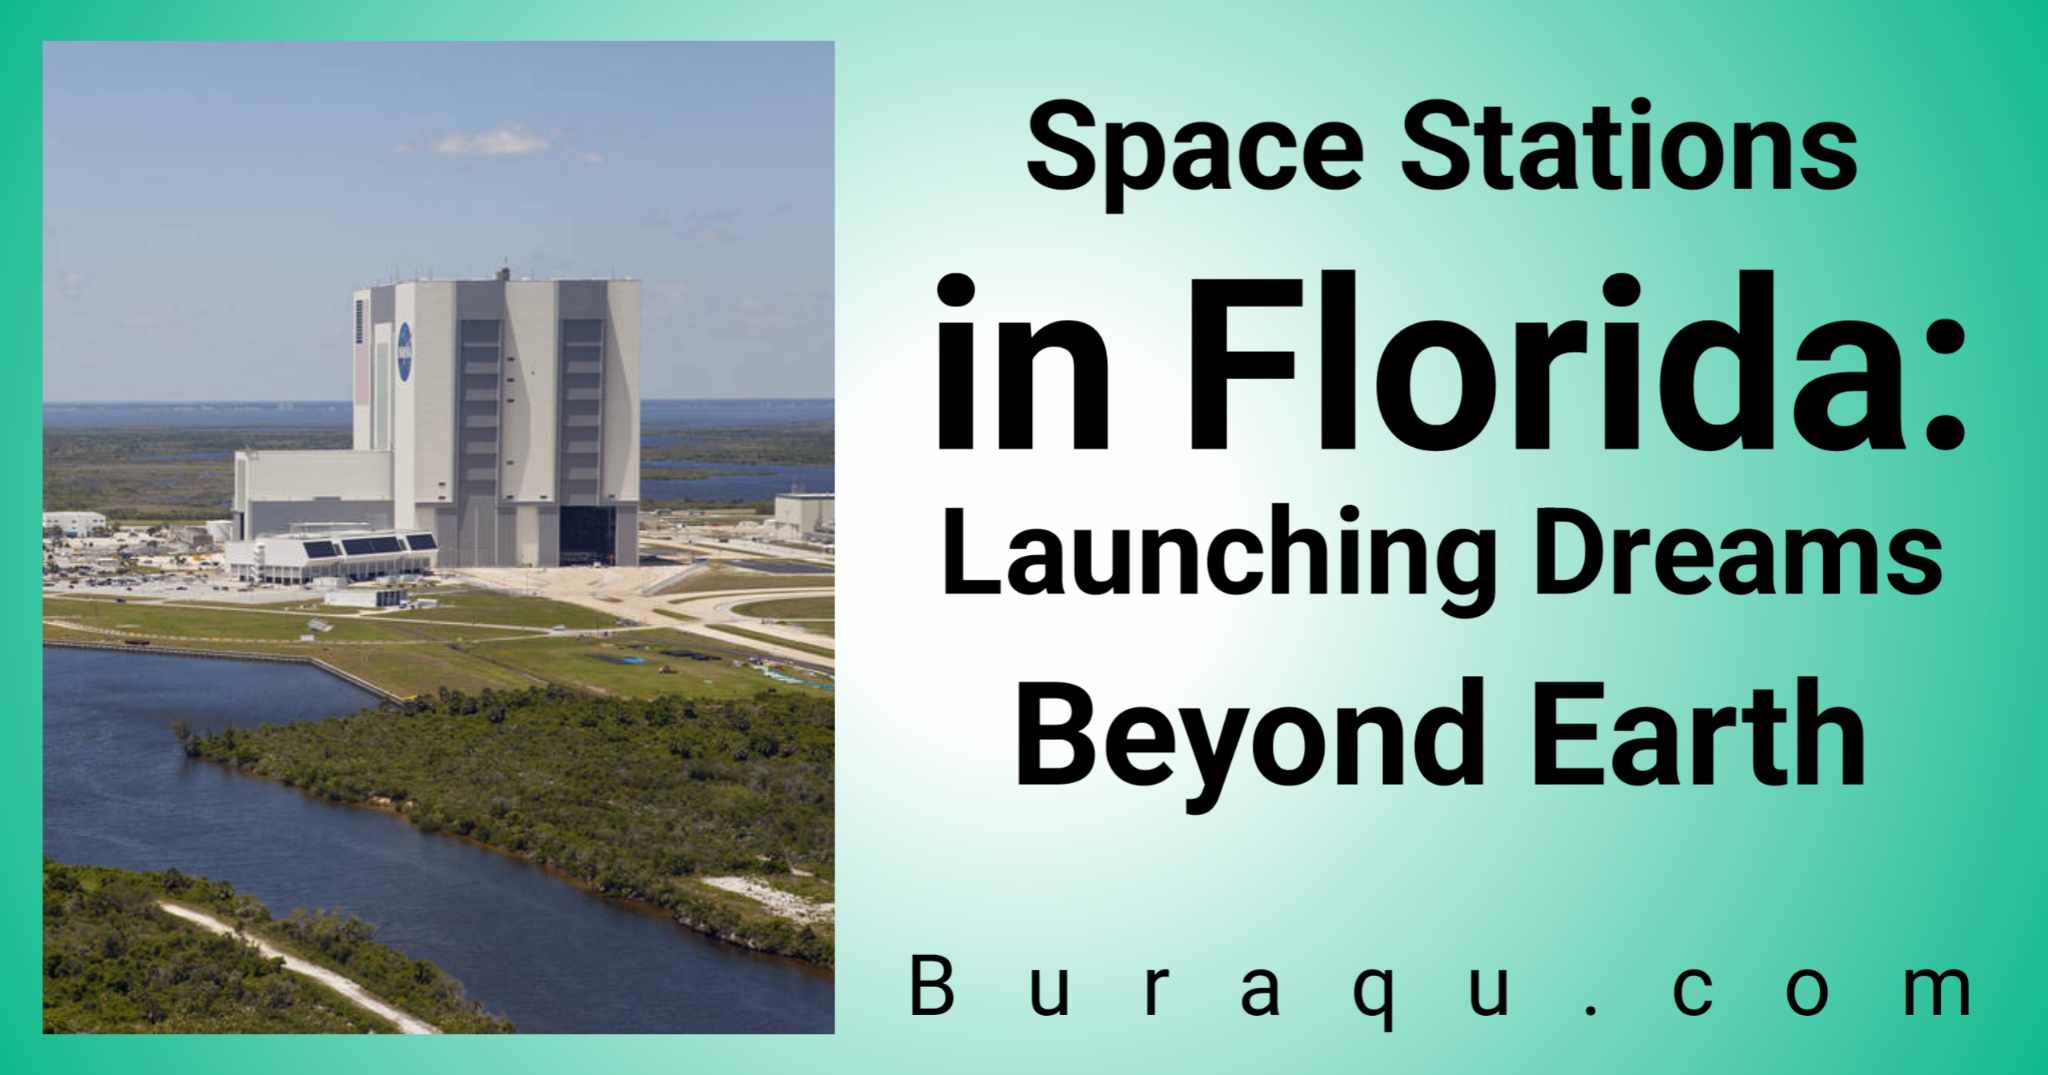 Space Stations in Florida: Launching Dreams Beyond Earth